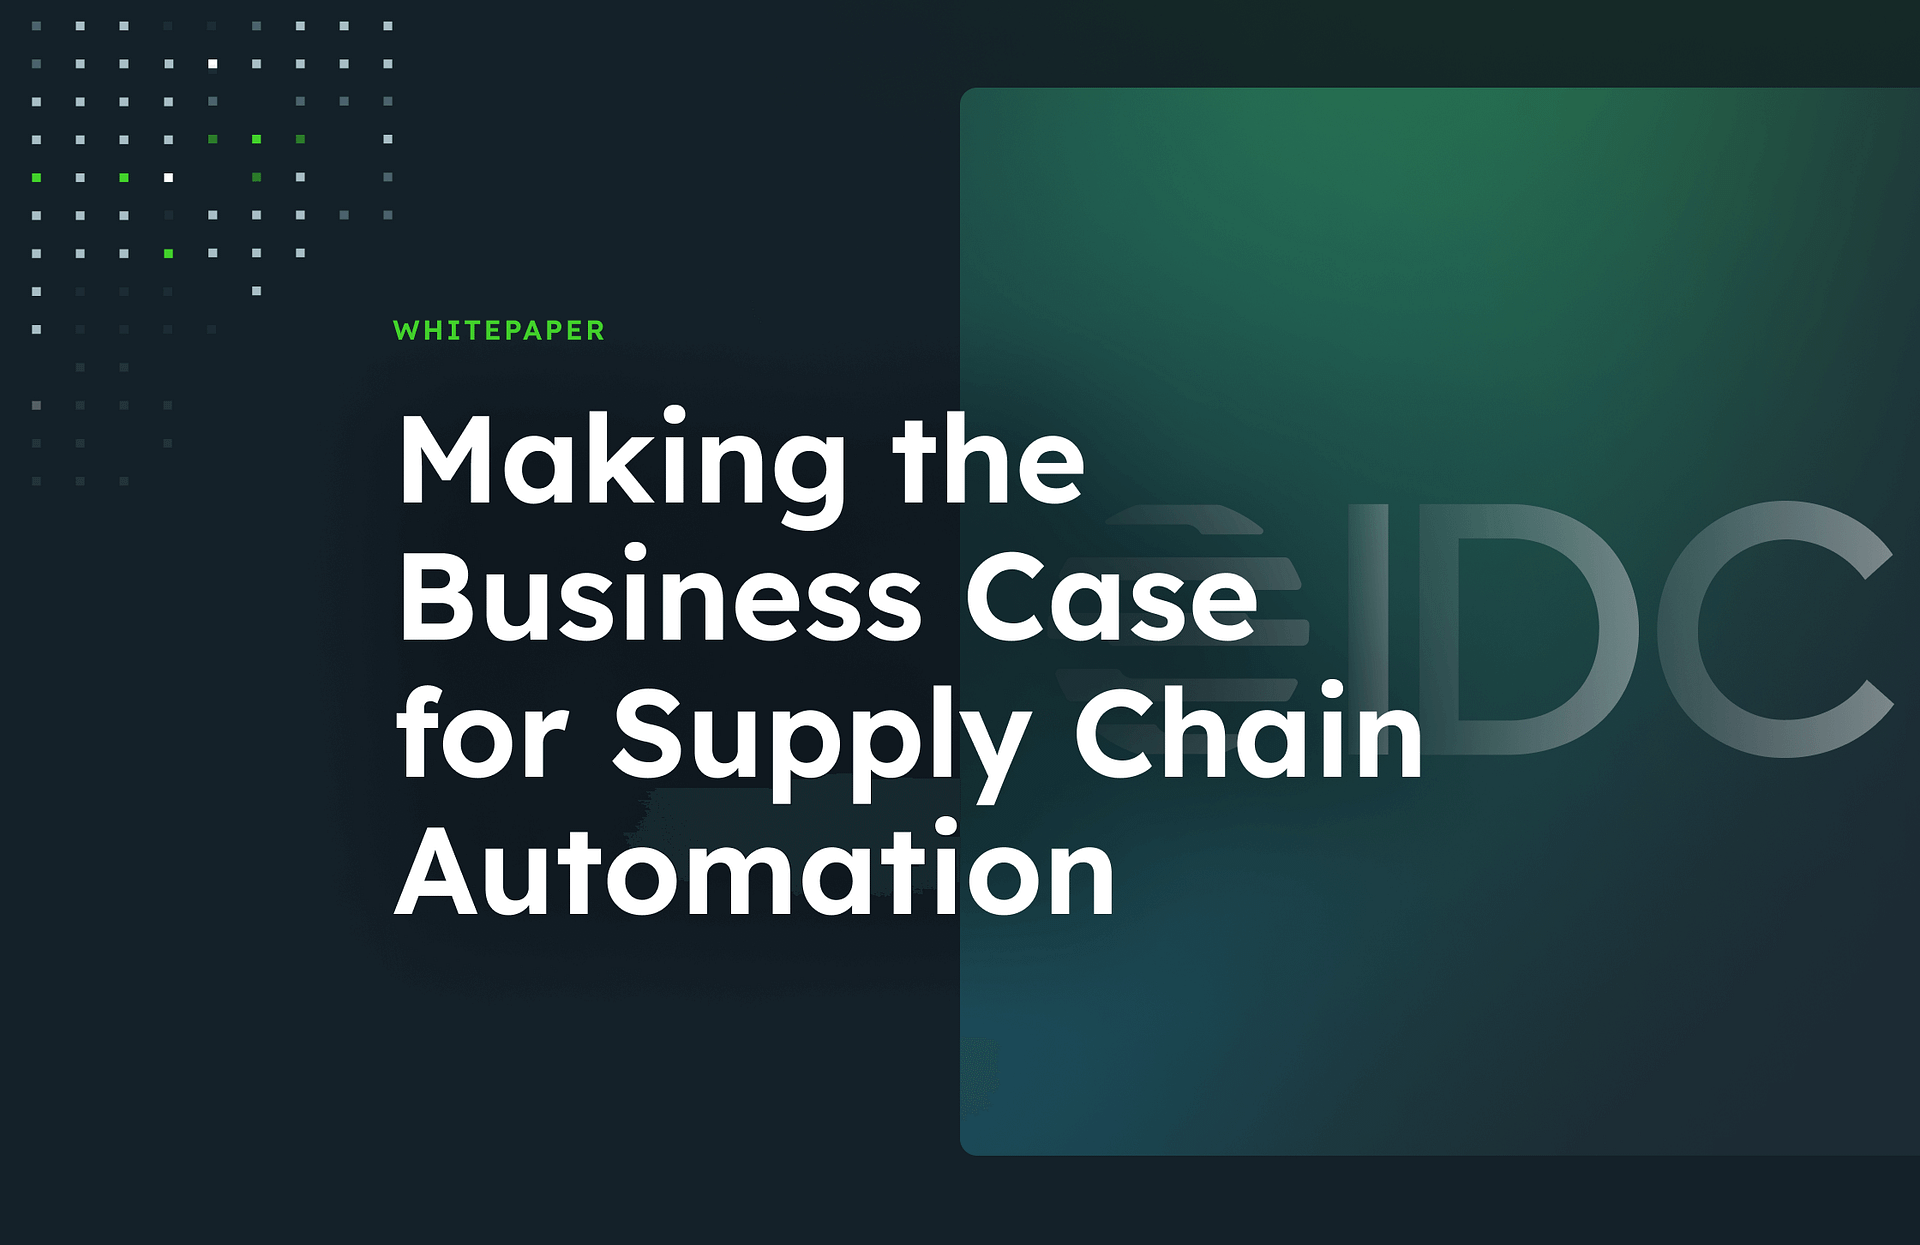 Making the business case for supply chain automation text on a black and green background